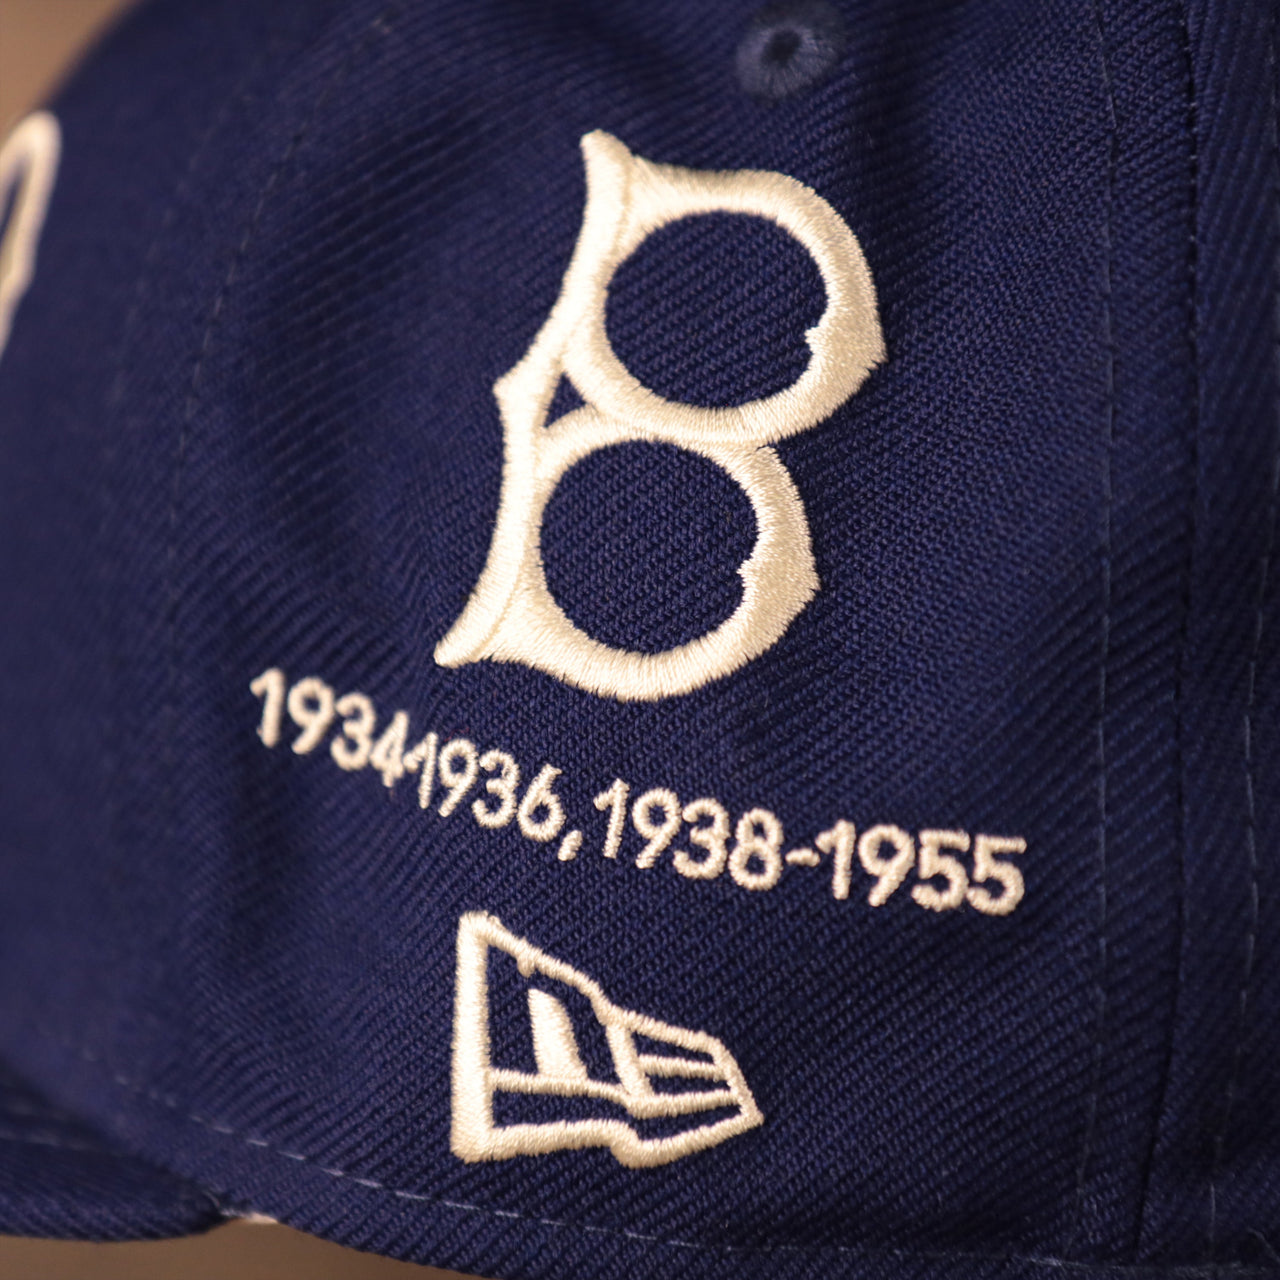 The 1934 and 1955 logo of the Dodgers on the blue New Era 59fifty.